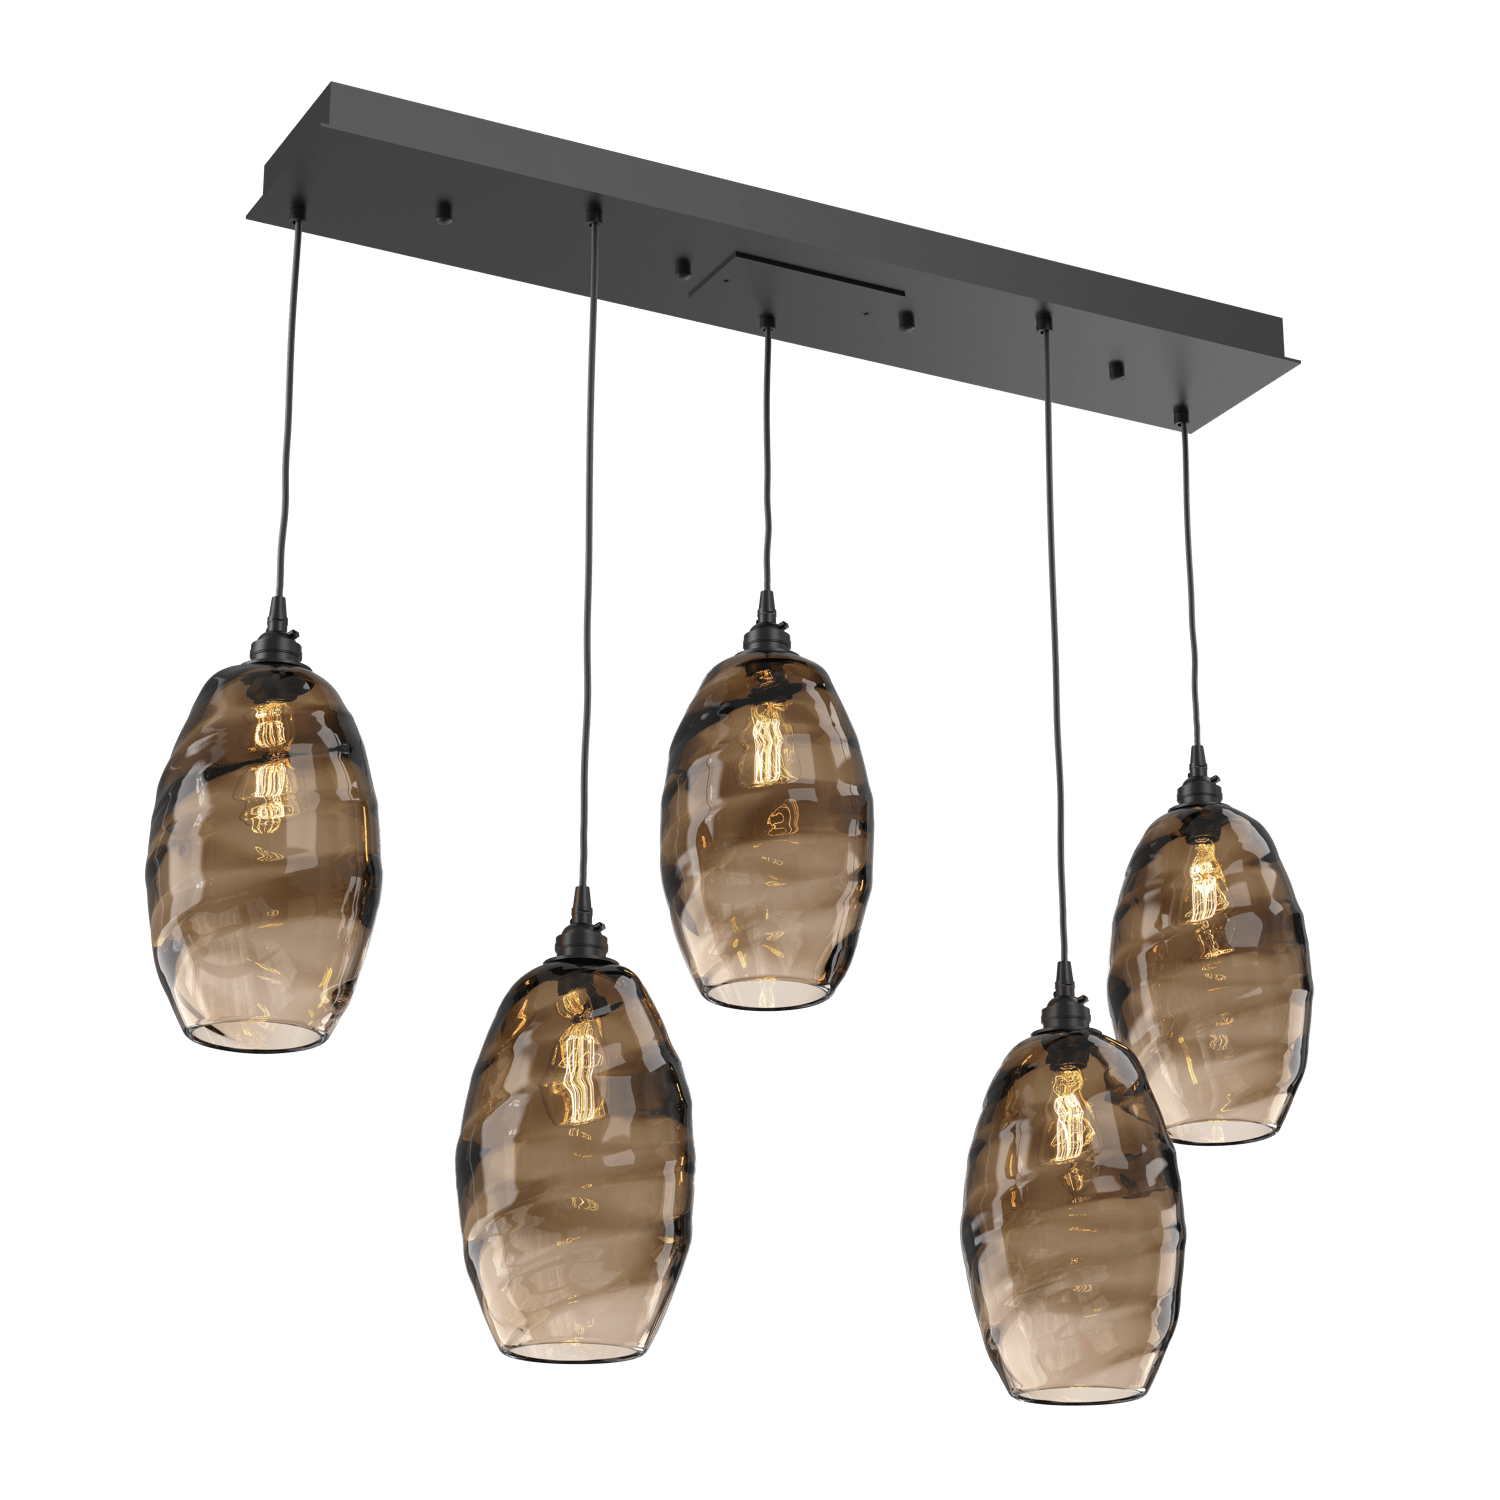 PLB0035-05-MB-OB-Hammerton-Studio-Optic-Blown-Glass-Elisse-5-light-linear-pendant-chandelier-with-matte-black-finish-and-optic-bronze-blown-glass-shades-and-incandescent-lamping